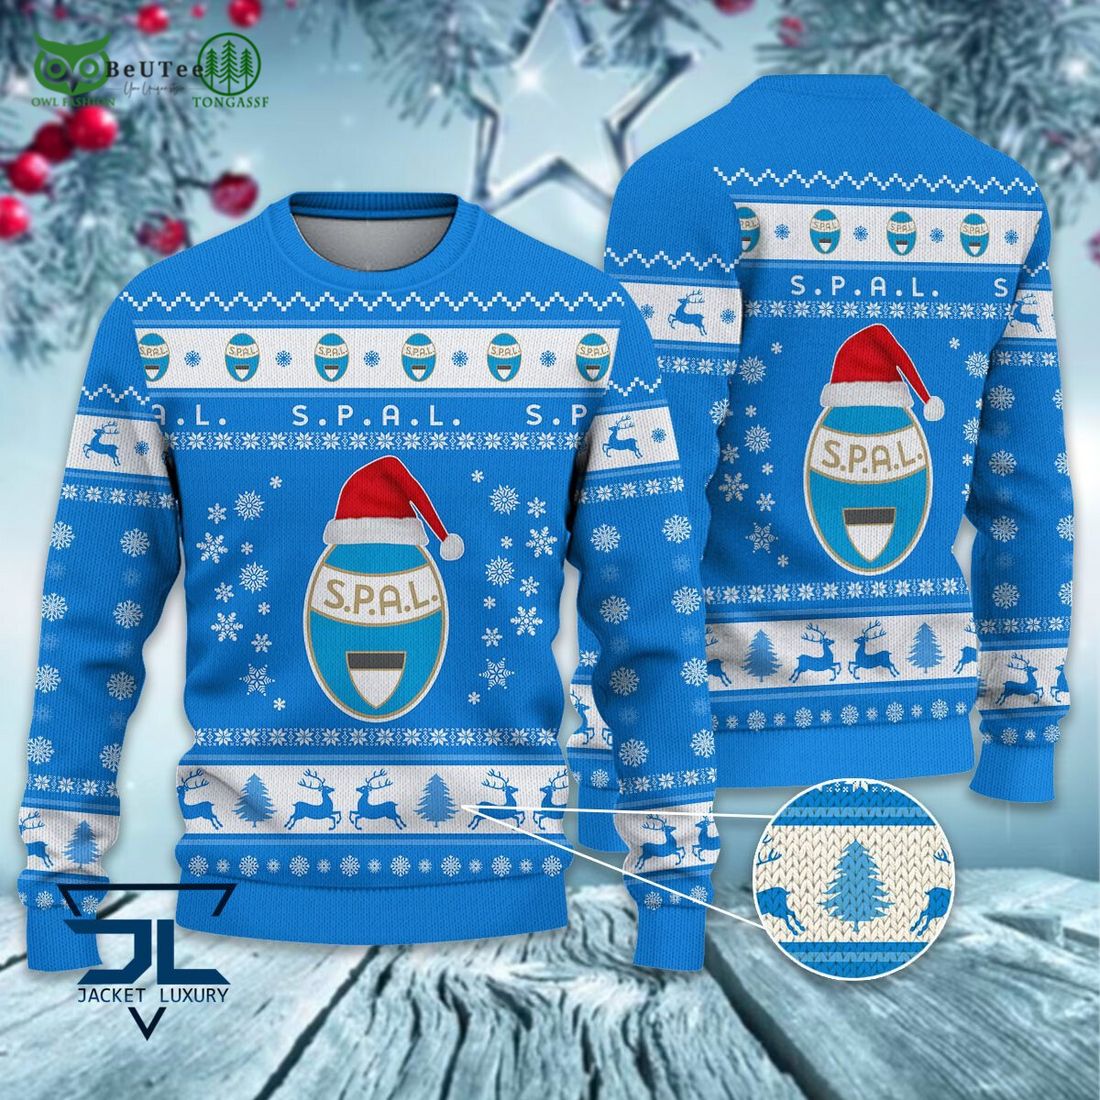 spal 2013 football lega serie a ugly sweater 1 ODhGD